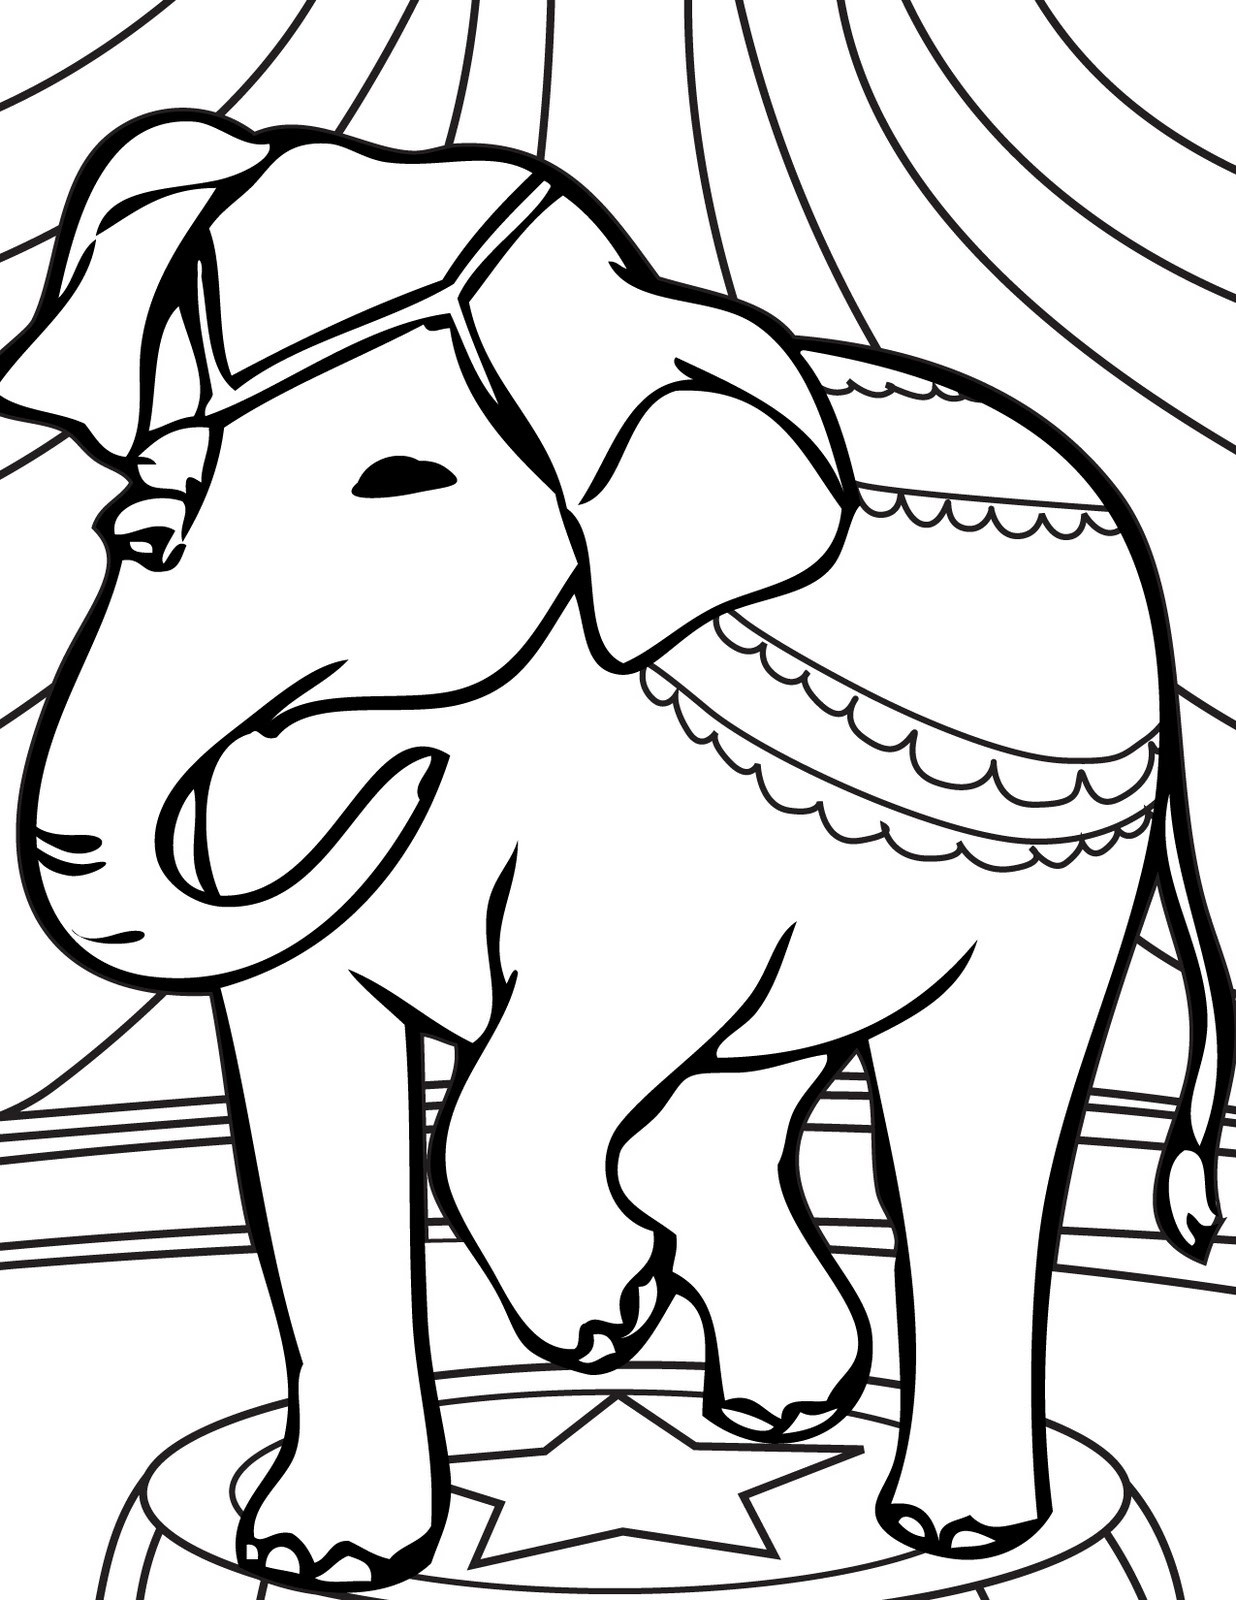 Elephant Coloring Book Pages
 Circus Elephant Coloring pages Ideas To Kids